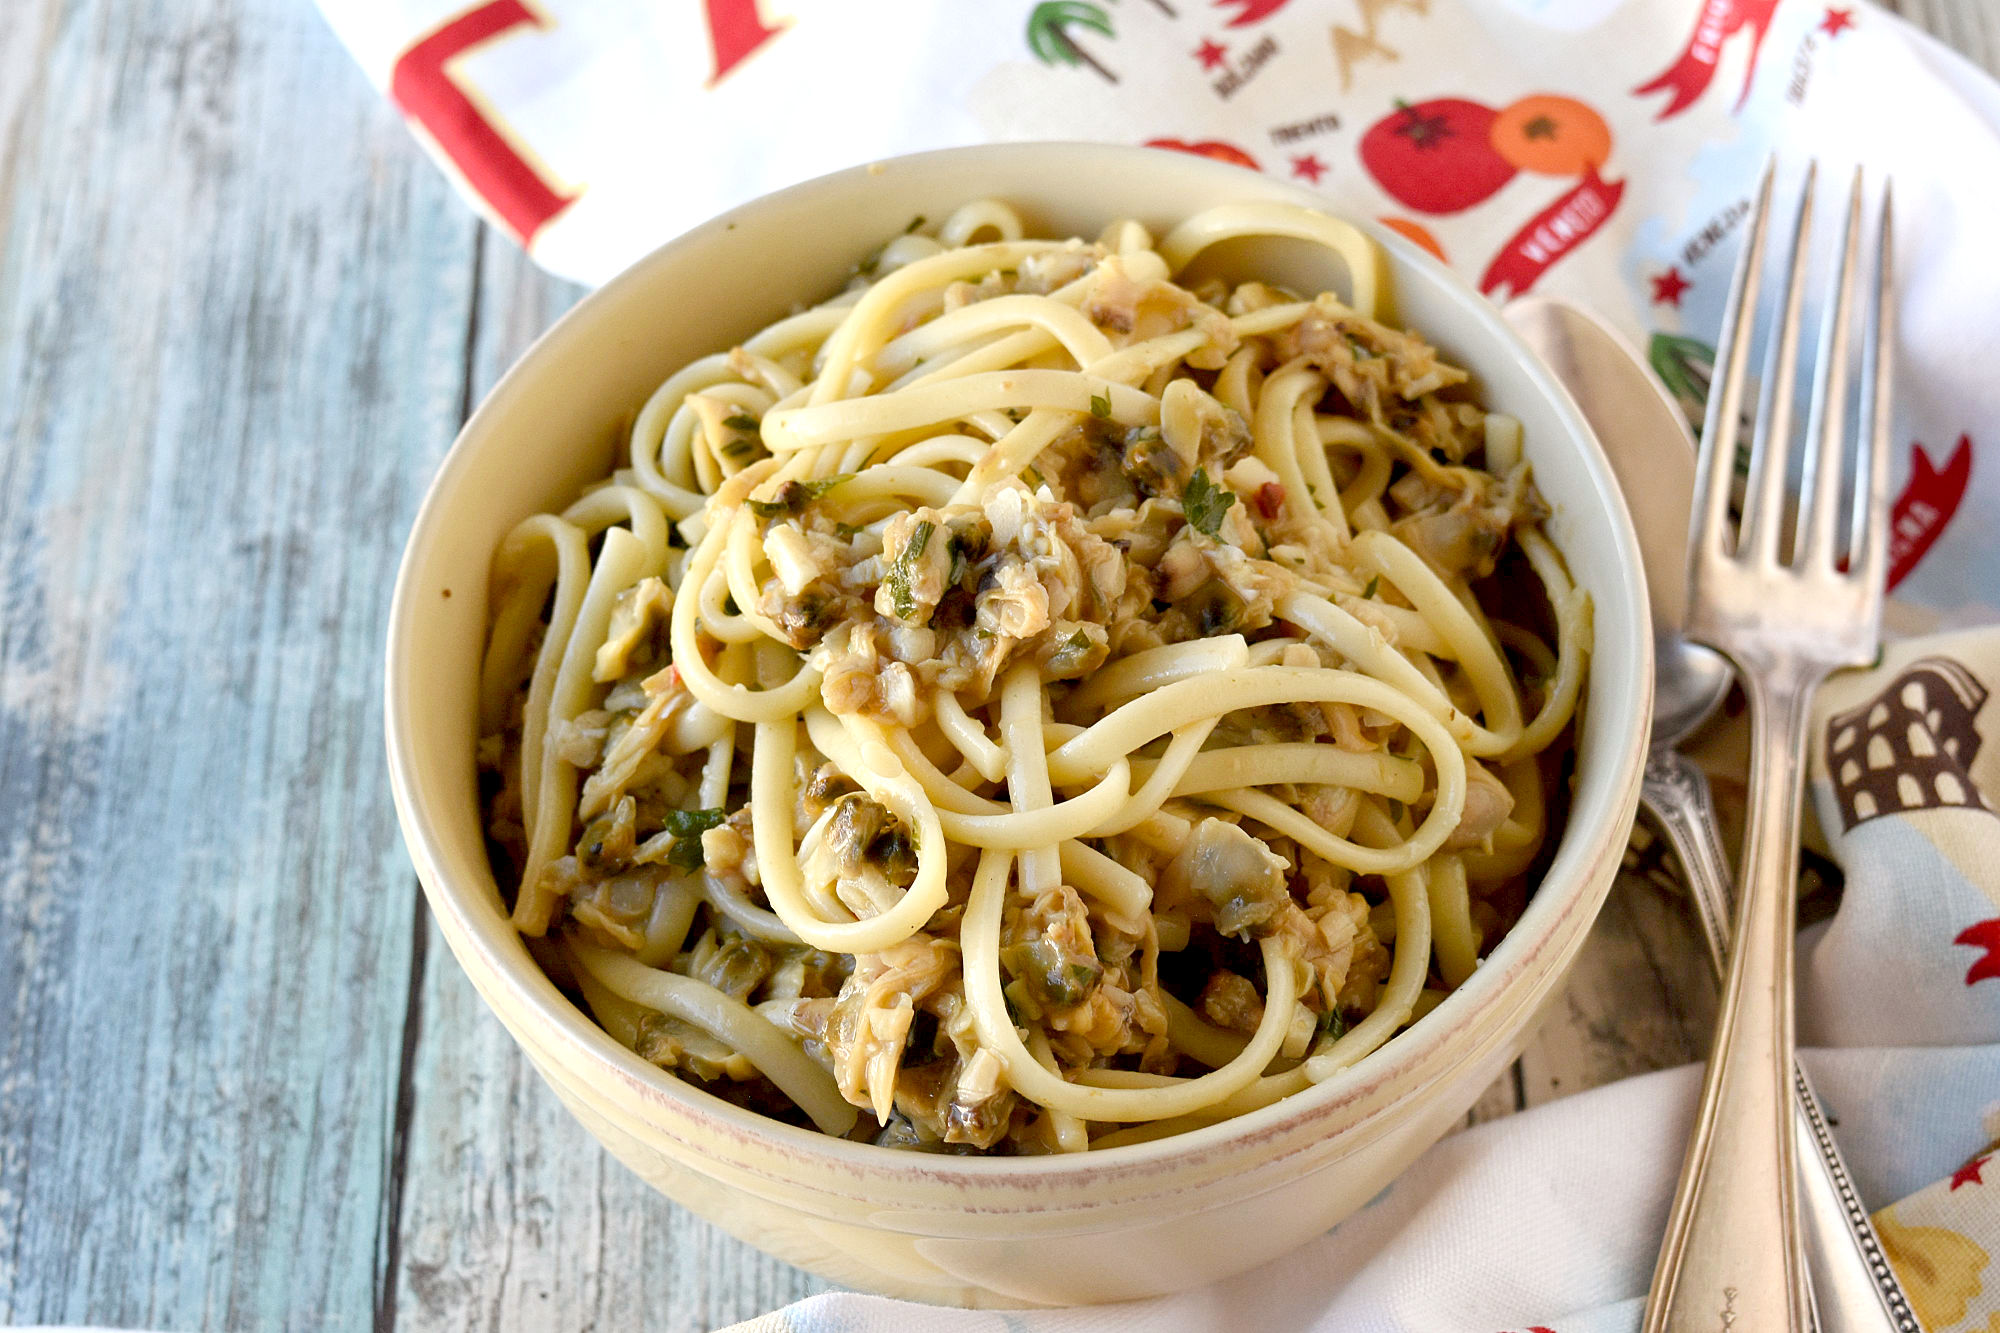 Easy Linguine with Clam Sauce uses pantry ingredients and comes together in a snap! It’s perfect for those busy weeknights and even fancy enough for a date dinner! #OurFamilyTable